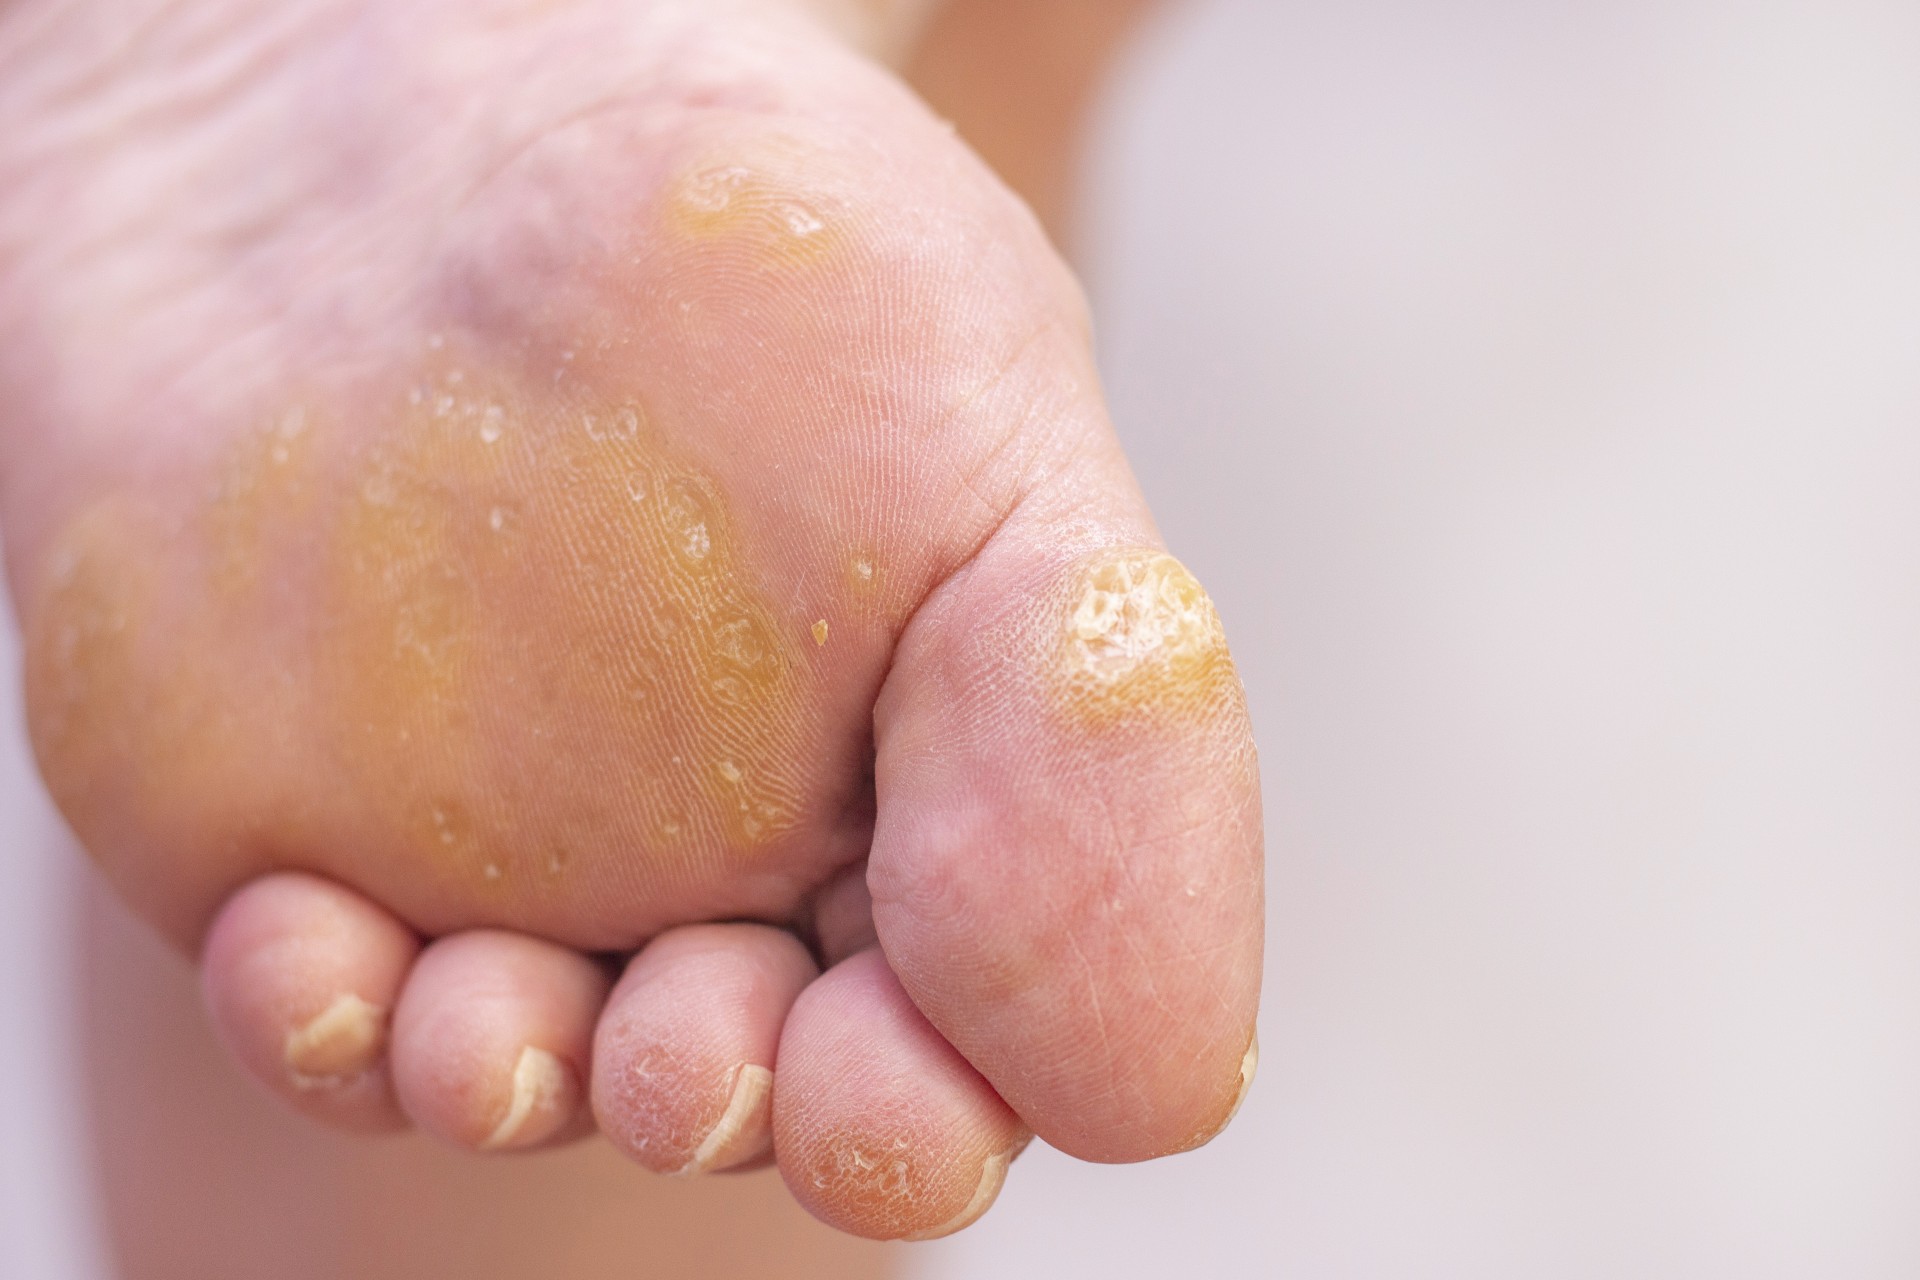 If there is one “industry” that will likely persist forever, it’s the constant stream of “home remedies” people claim for a variety of ailments – including plantar warts. We’ll come right out and say it now: the “miraculous” methods for treating plantar warts at home you have heard about are not scientifically verified. In fact, there’s little evidence that they work. We provide professional, proven treatment for you. So, why do “home remedies” continue to persist despite lack of evidence? There are several reasons. Warts Went Away – But Was it the Home Remedy? Plantar warts are caused by a virus – specifically, certain strains of the human papillomavirus (HPV). The virus invades the upper layers of the skin and creates the rough, grainy, bumpy patches you are likely familiar with. The virus can thrive for some time, but eventually most cases will resolve on their own. This can take time, though – up to 2 years or longer in some cases. So how do home remedies play into this? If one has been trying various home remedies and their plantar warts start to disappear, they may assume that this treatment finally “did the trick.” That only seems natural to believe. However, correlation does not always equal causation. There is a very good chance that the warts were already starting to fade away on their own, with or without the use of the home remedy. But if someone believes their remedy was responsible (and we are not blaming them for that), they may tell everyone about it, and others may try it until it “works” for them, too. It’s easy to unintentionally spread misinformation this way.